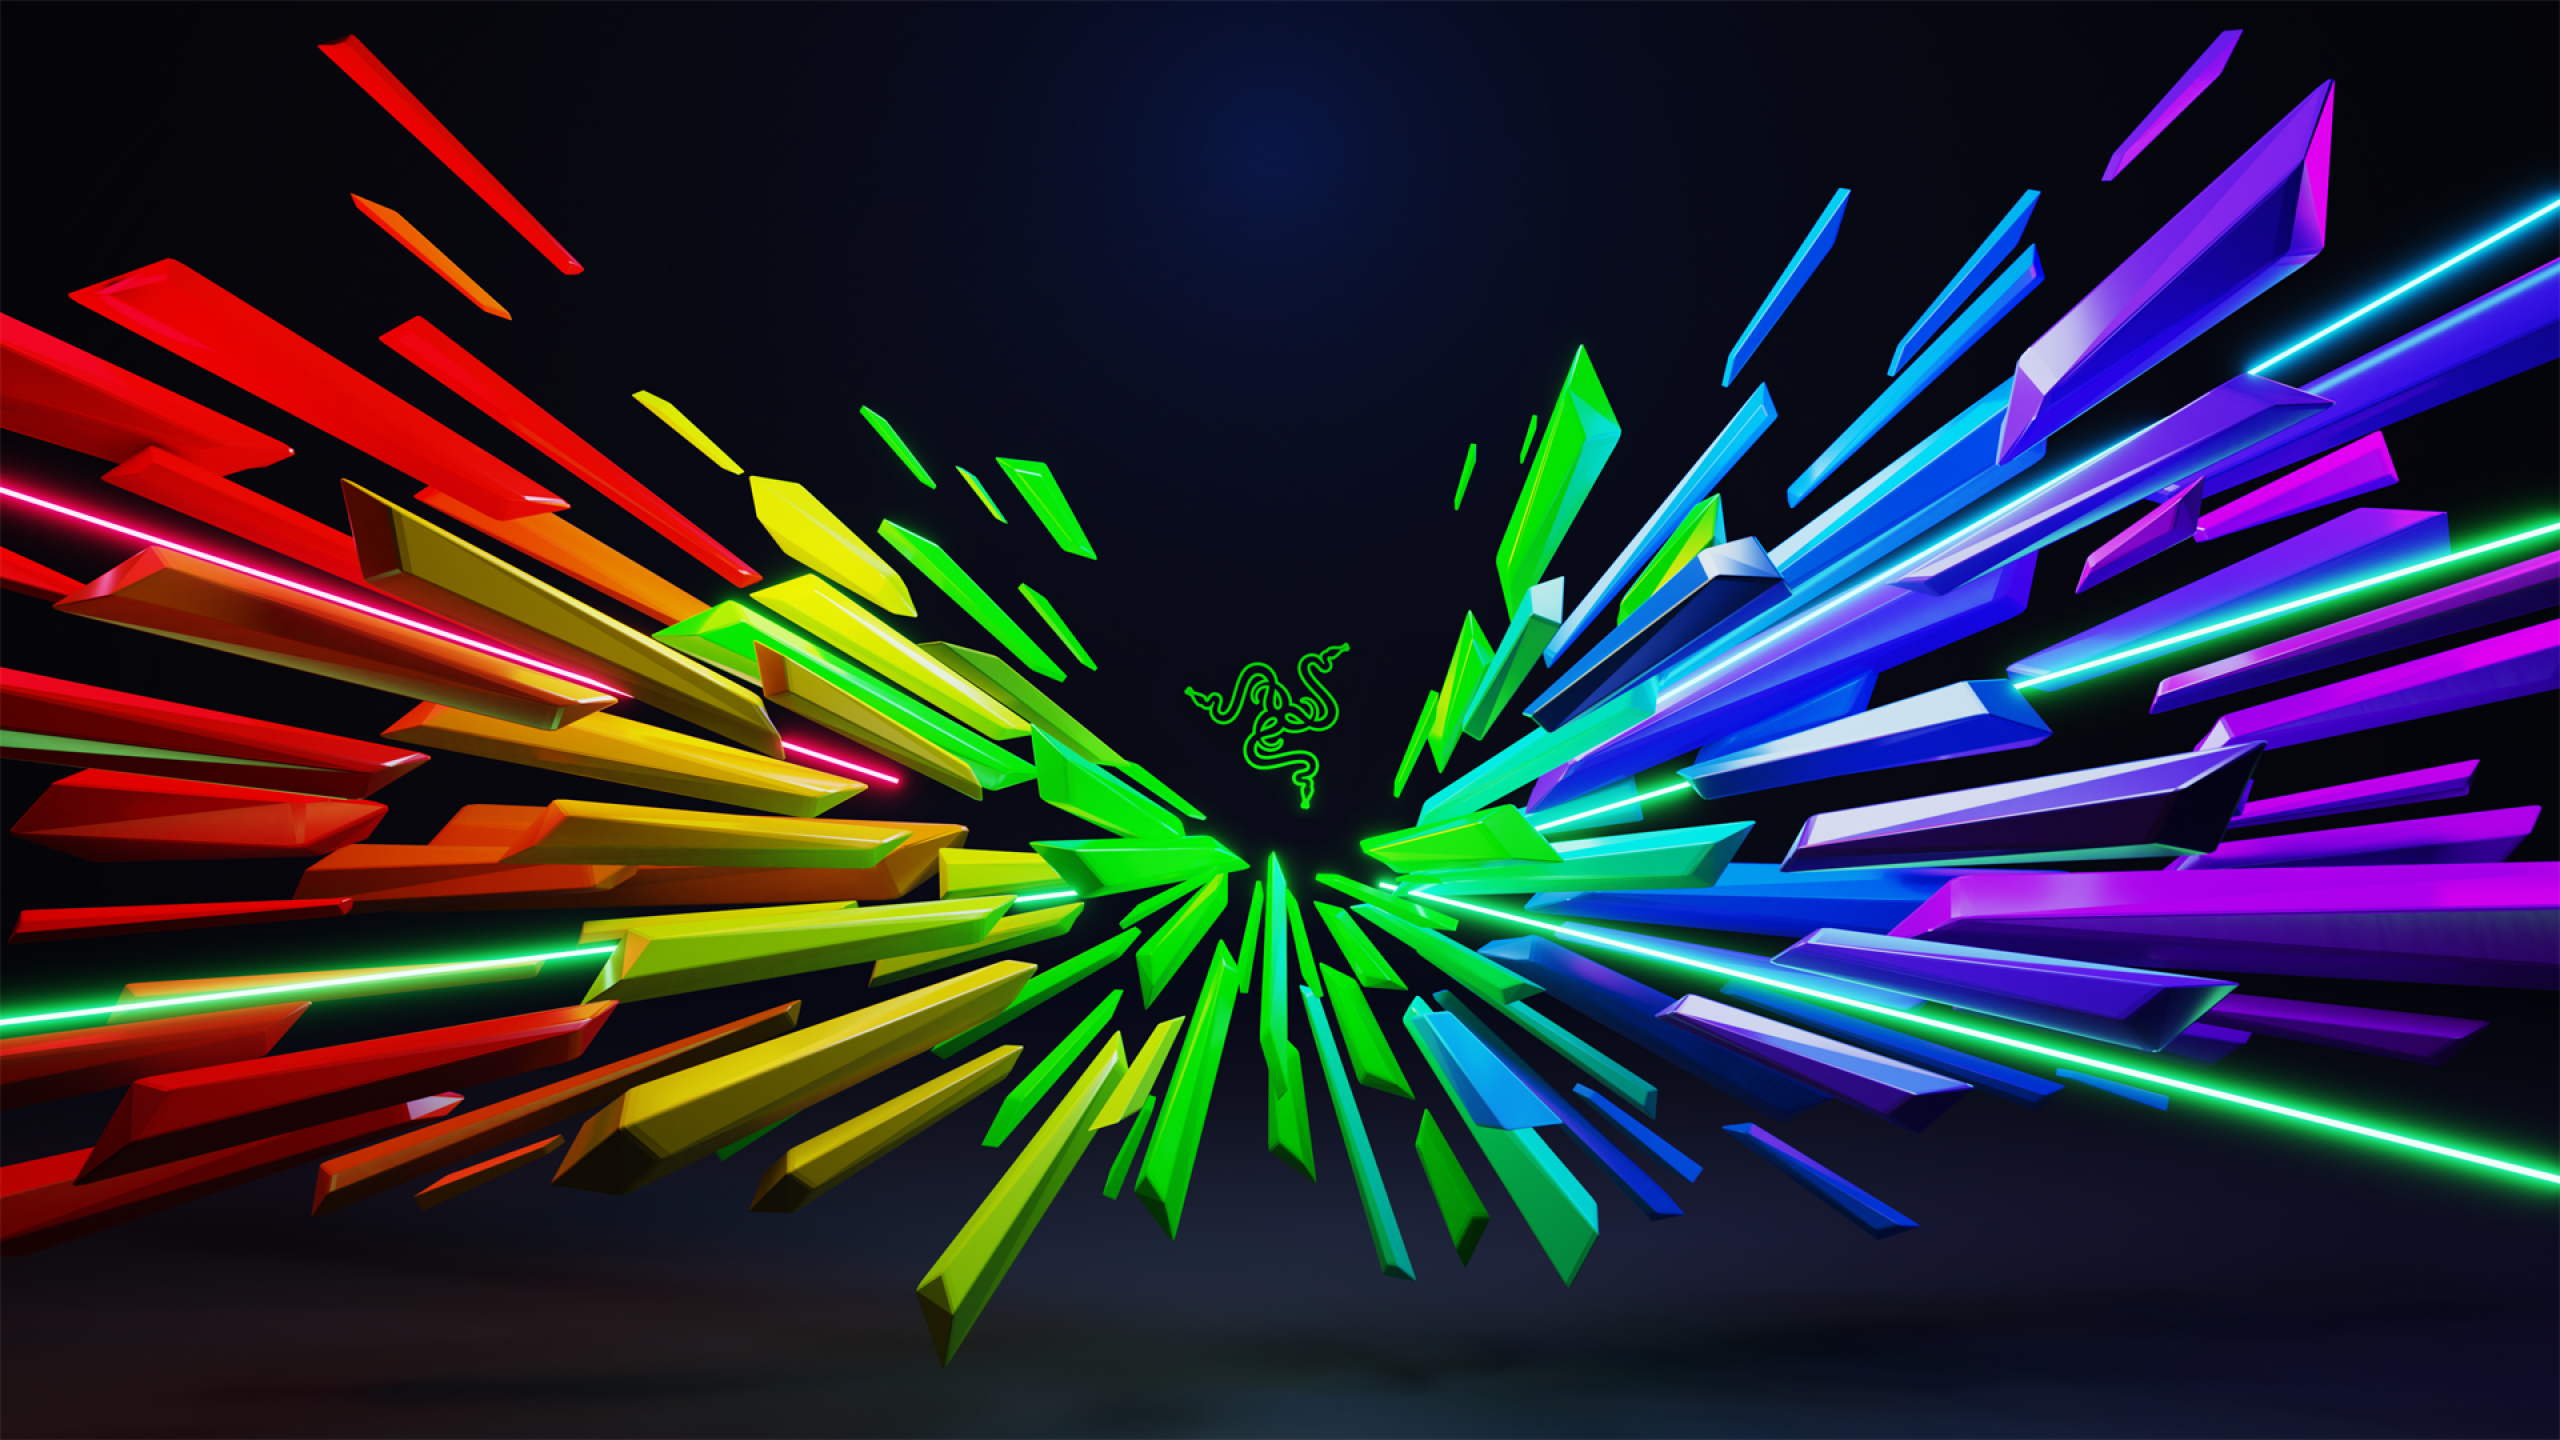 2560x1440 Scatter Razer 1440p Resolution Wallpaper Hd Brands 4k Wallpapers Images Photos And Background